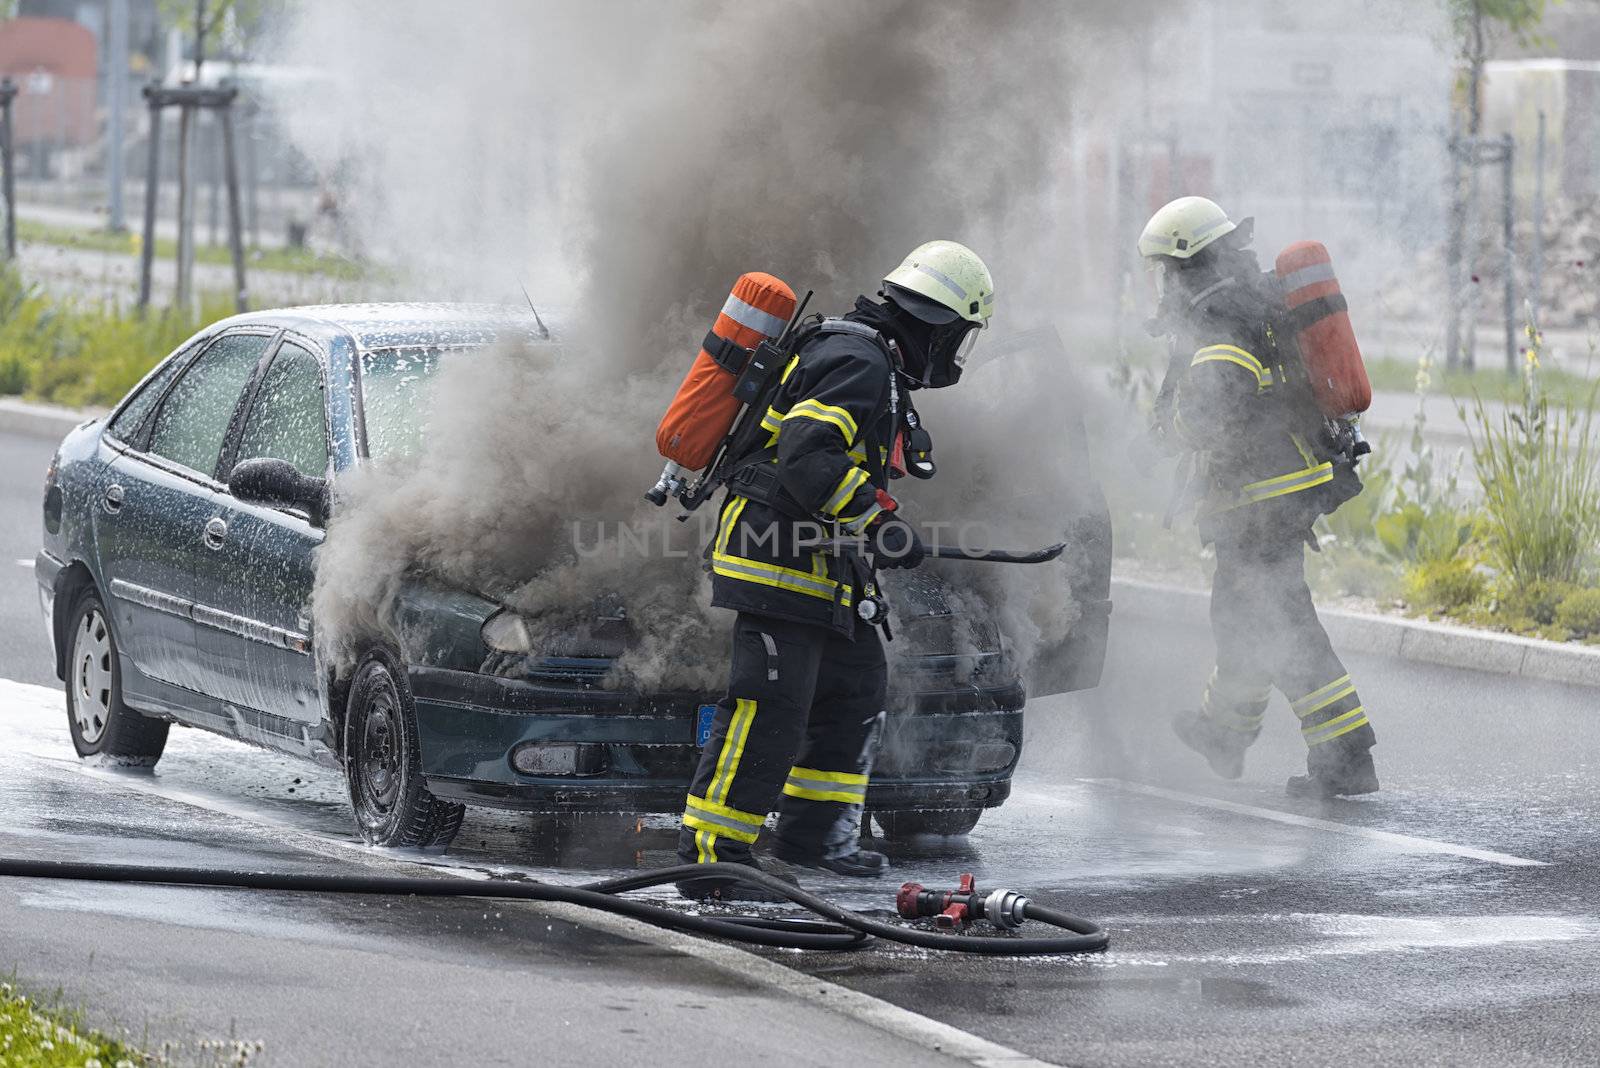 Burning motor vehicle been put out by firemen in protective clothing